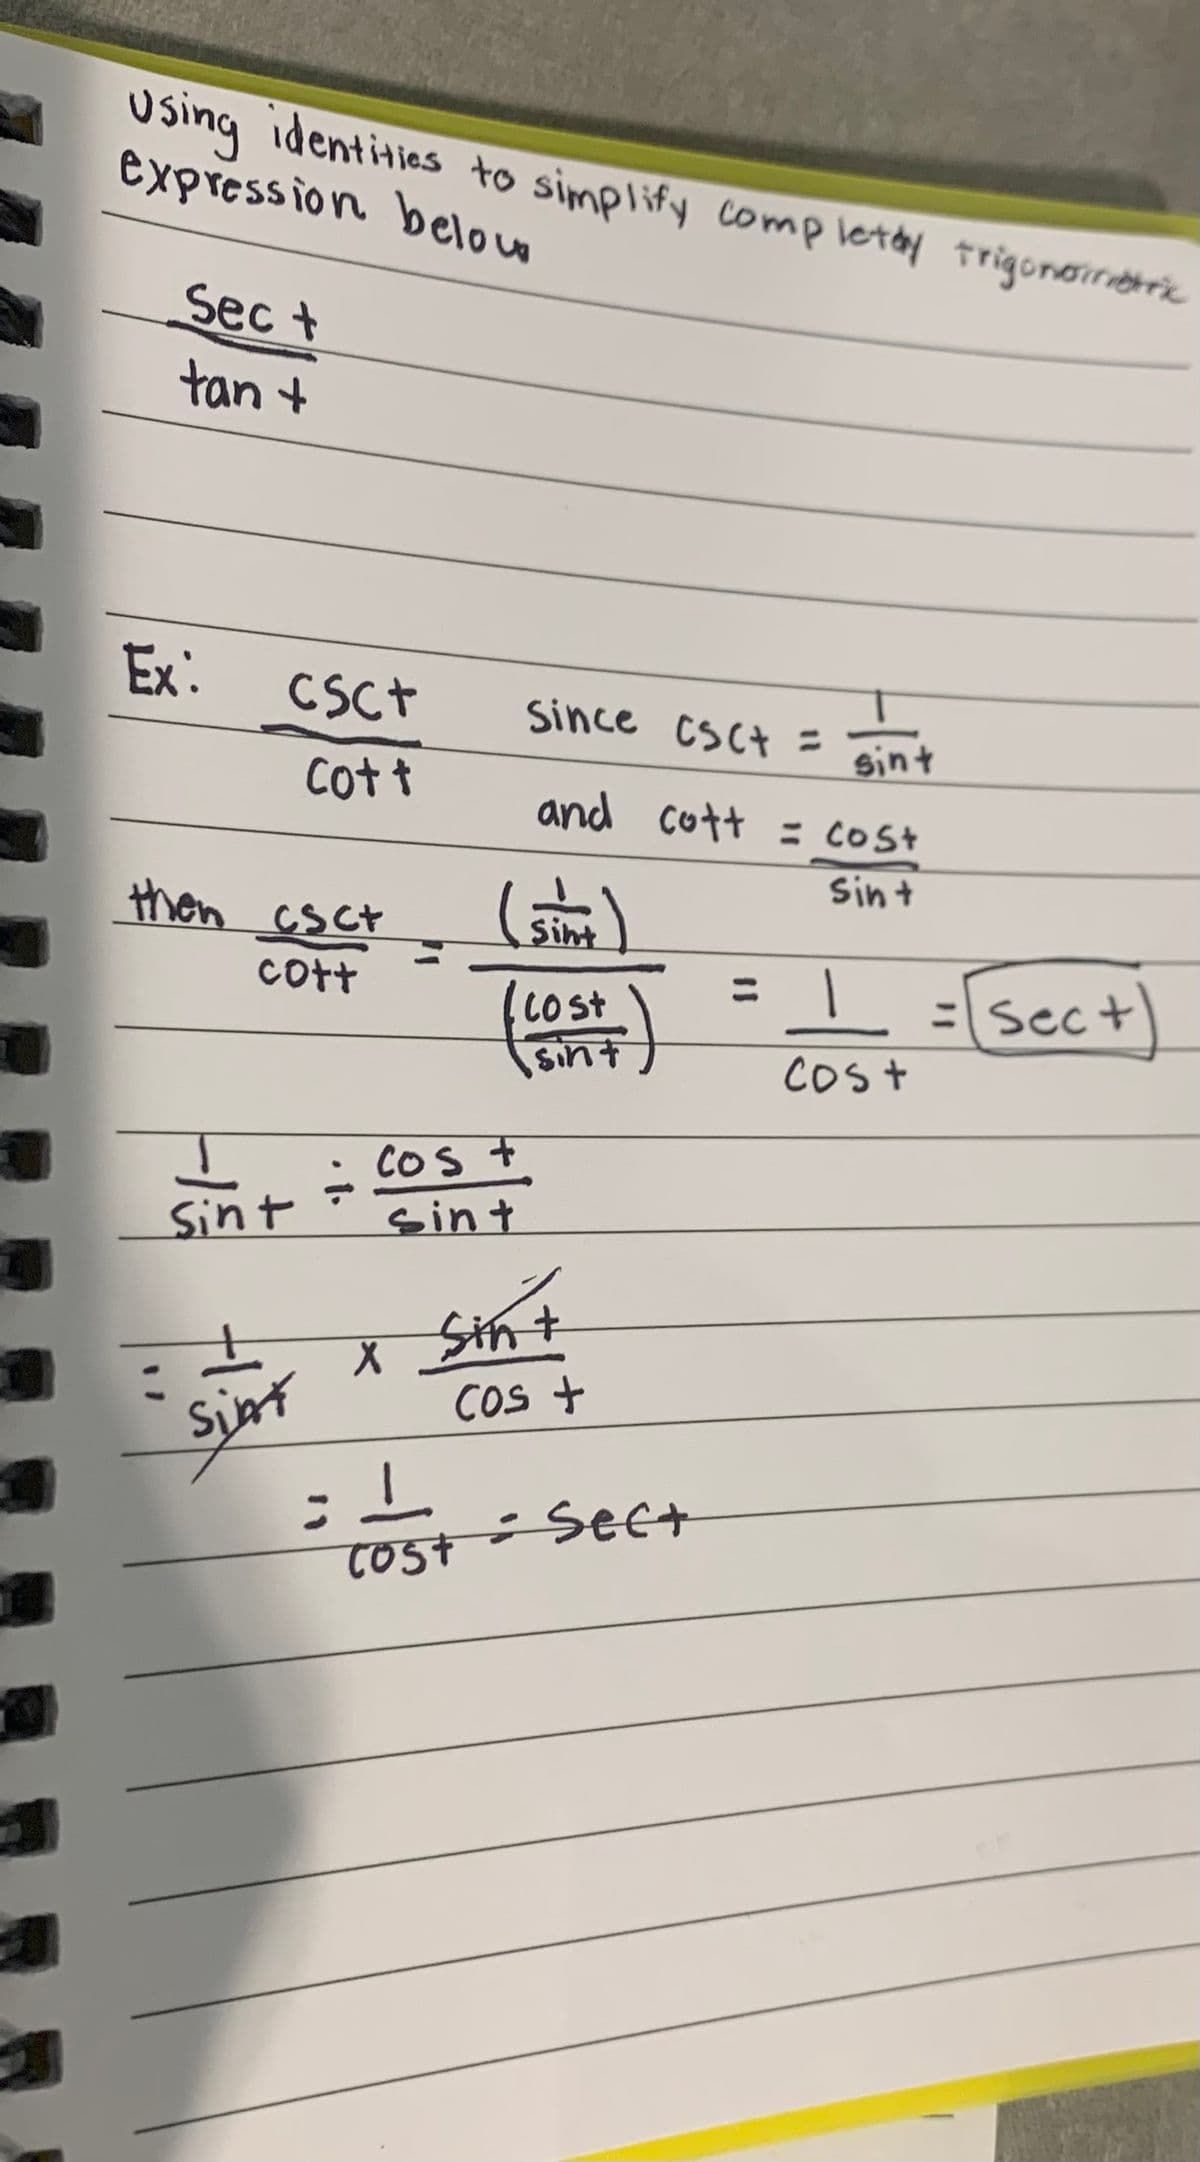 using identities to simplify completary trigonometric
expression below
Sect
tan +
Ex:
CSC+
Cott
then esc
cott
Sint
Sint
÷
Cos +
sint
Since csct =
sint
and cott = cost
Sin +
(sim)
( cost
Ti
sint
X Sint
Cos +
Cost = Sect
= 1
cost
= sect